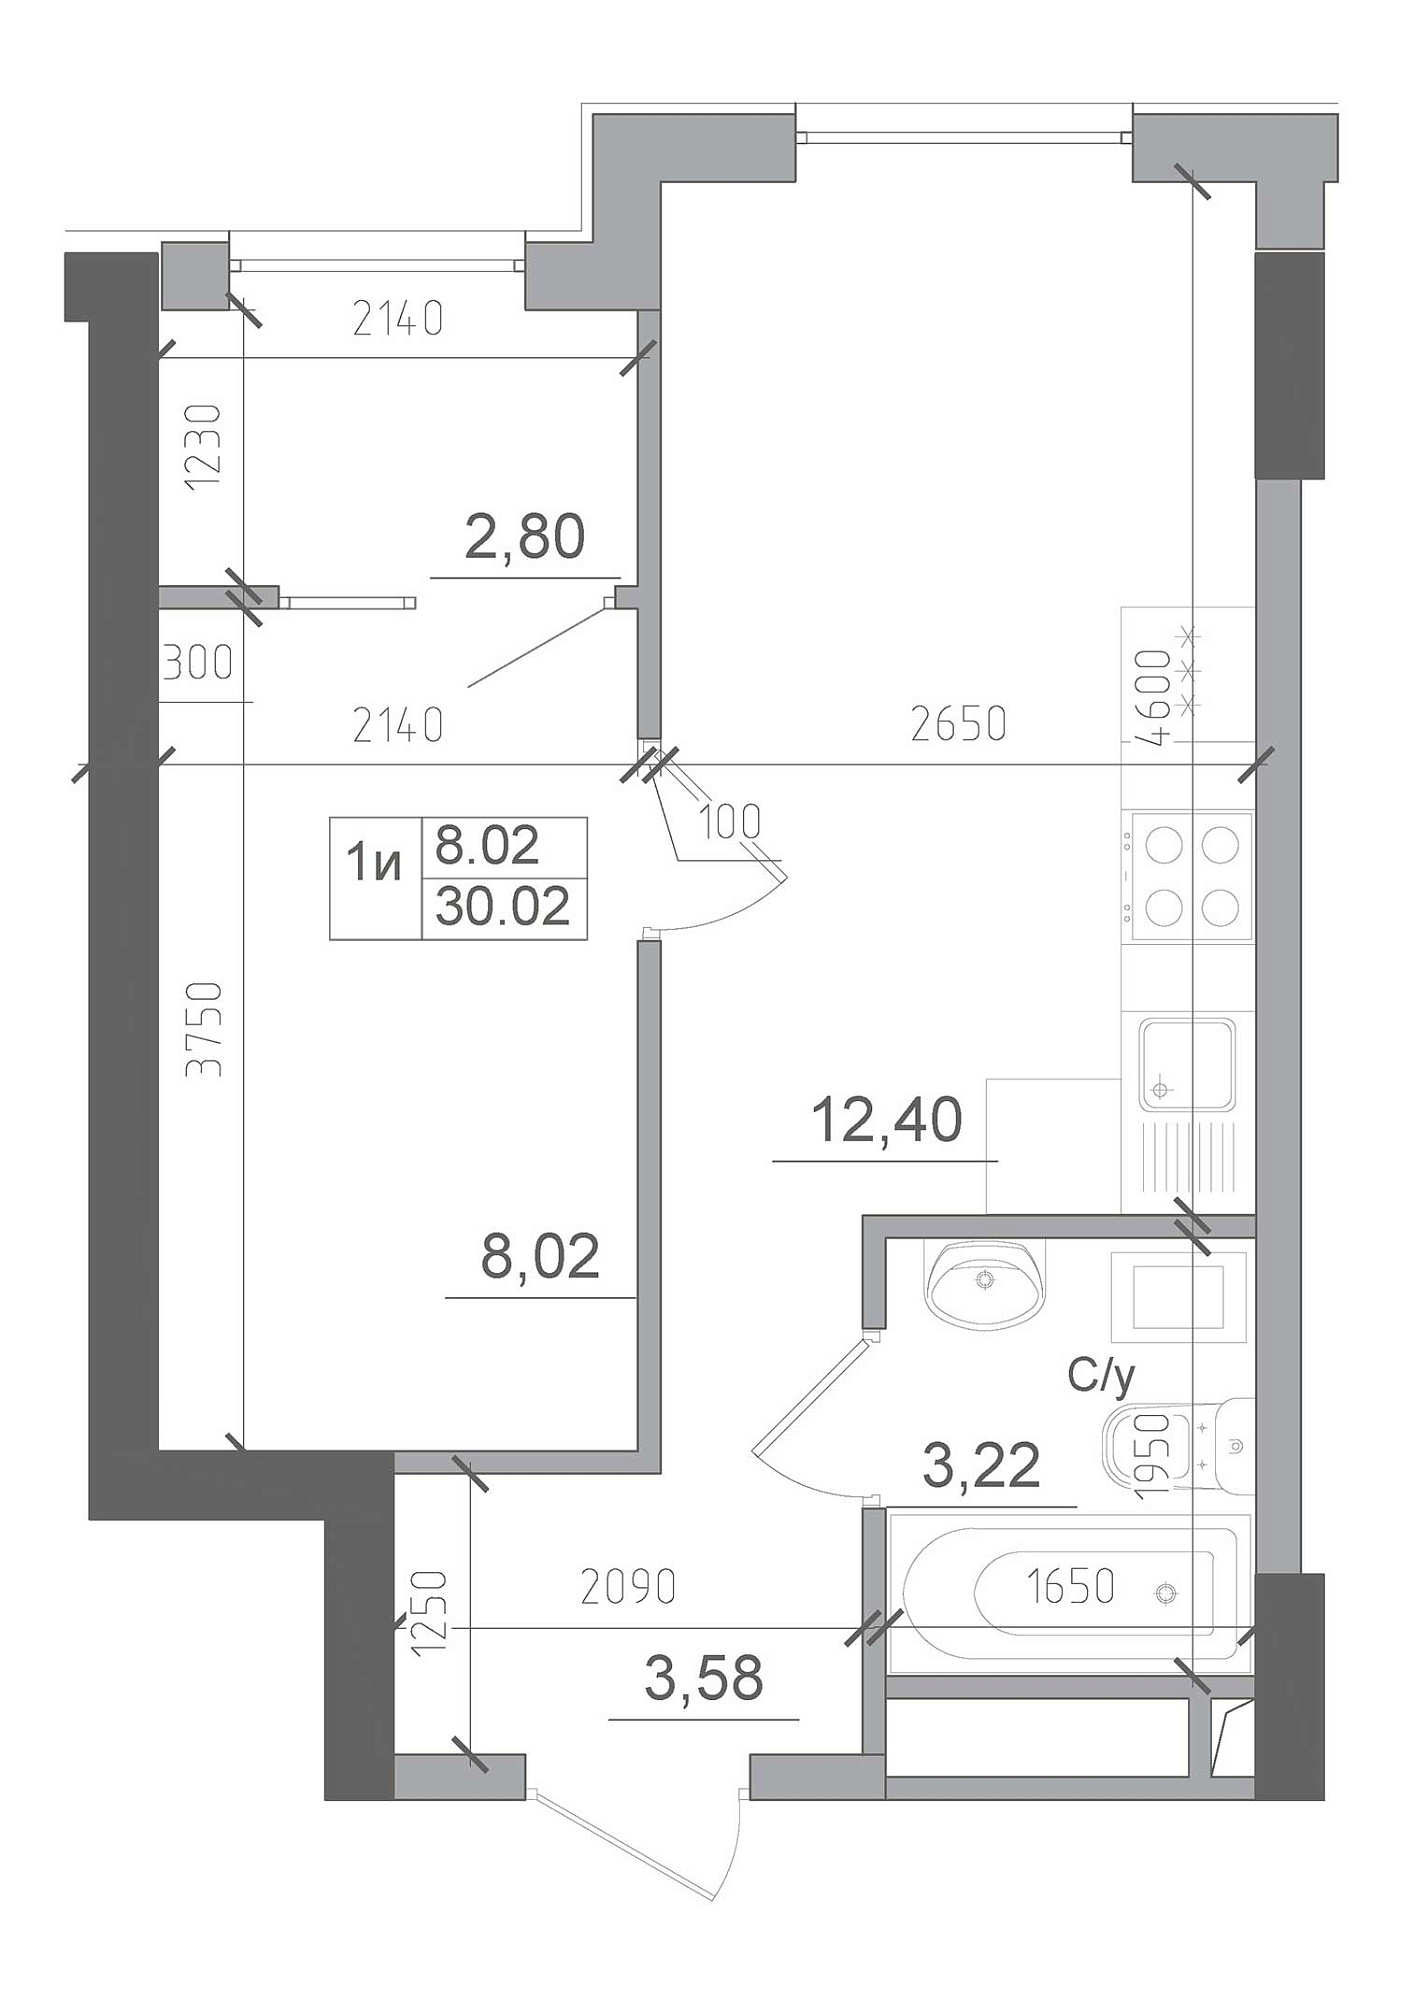 Planning 1-rm flats area 30.02m2, AB-22-07/00014.